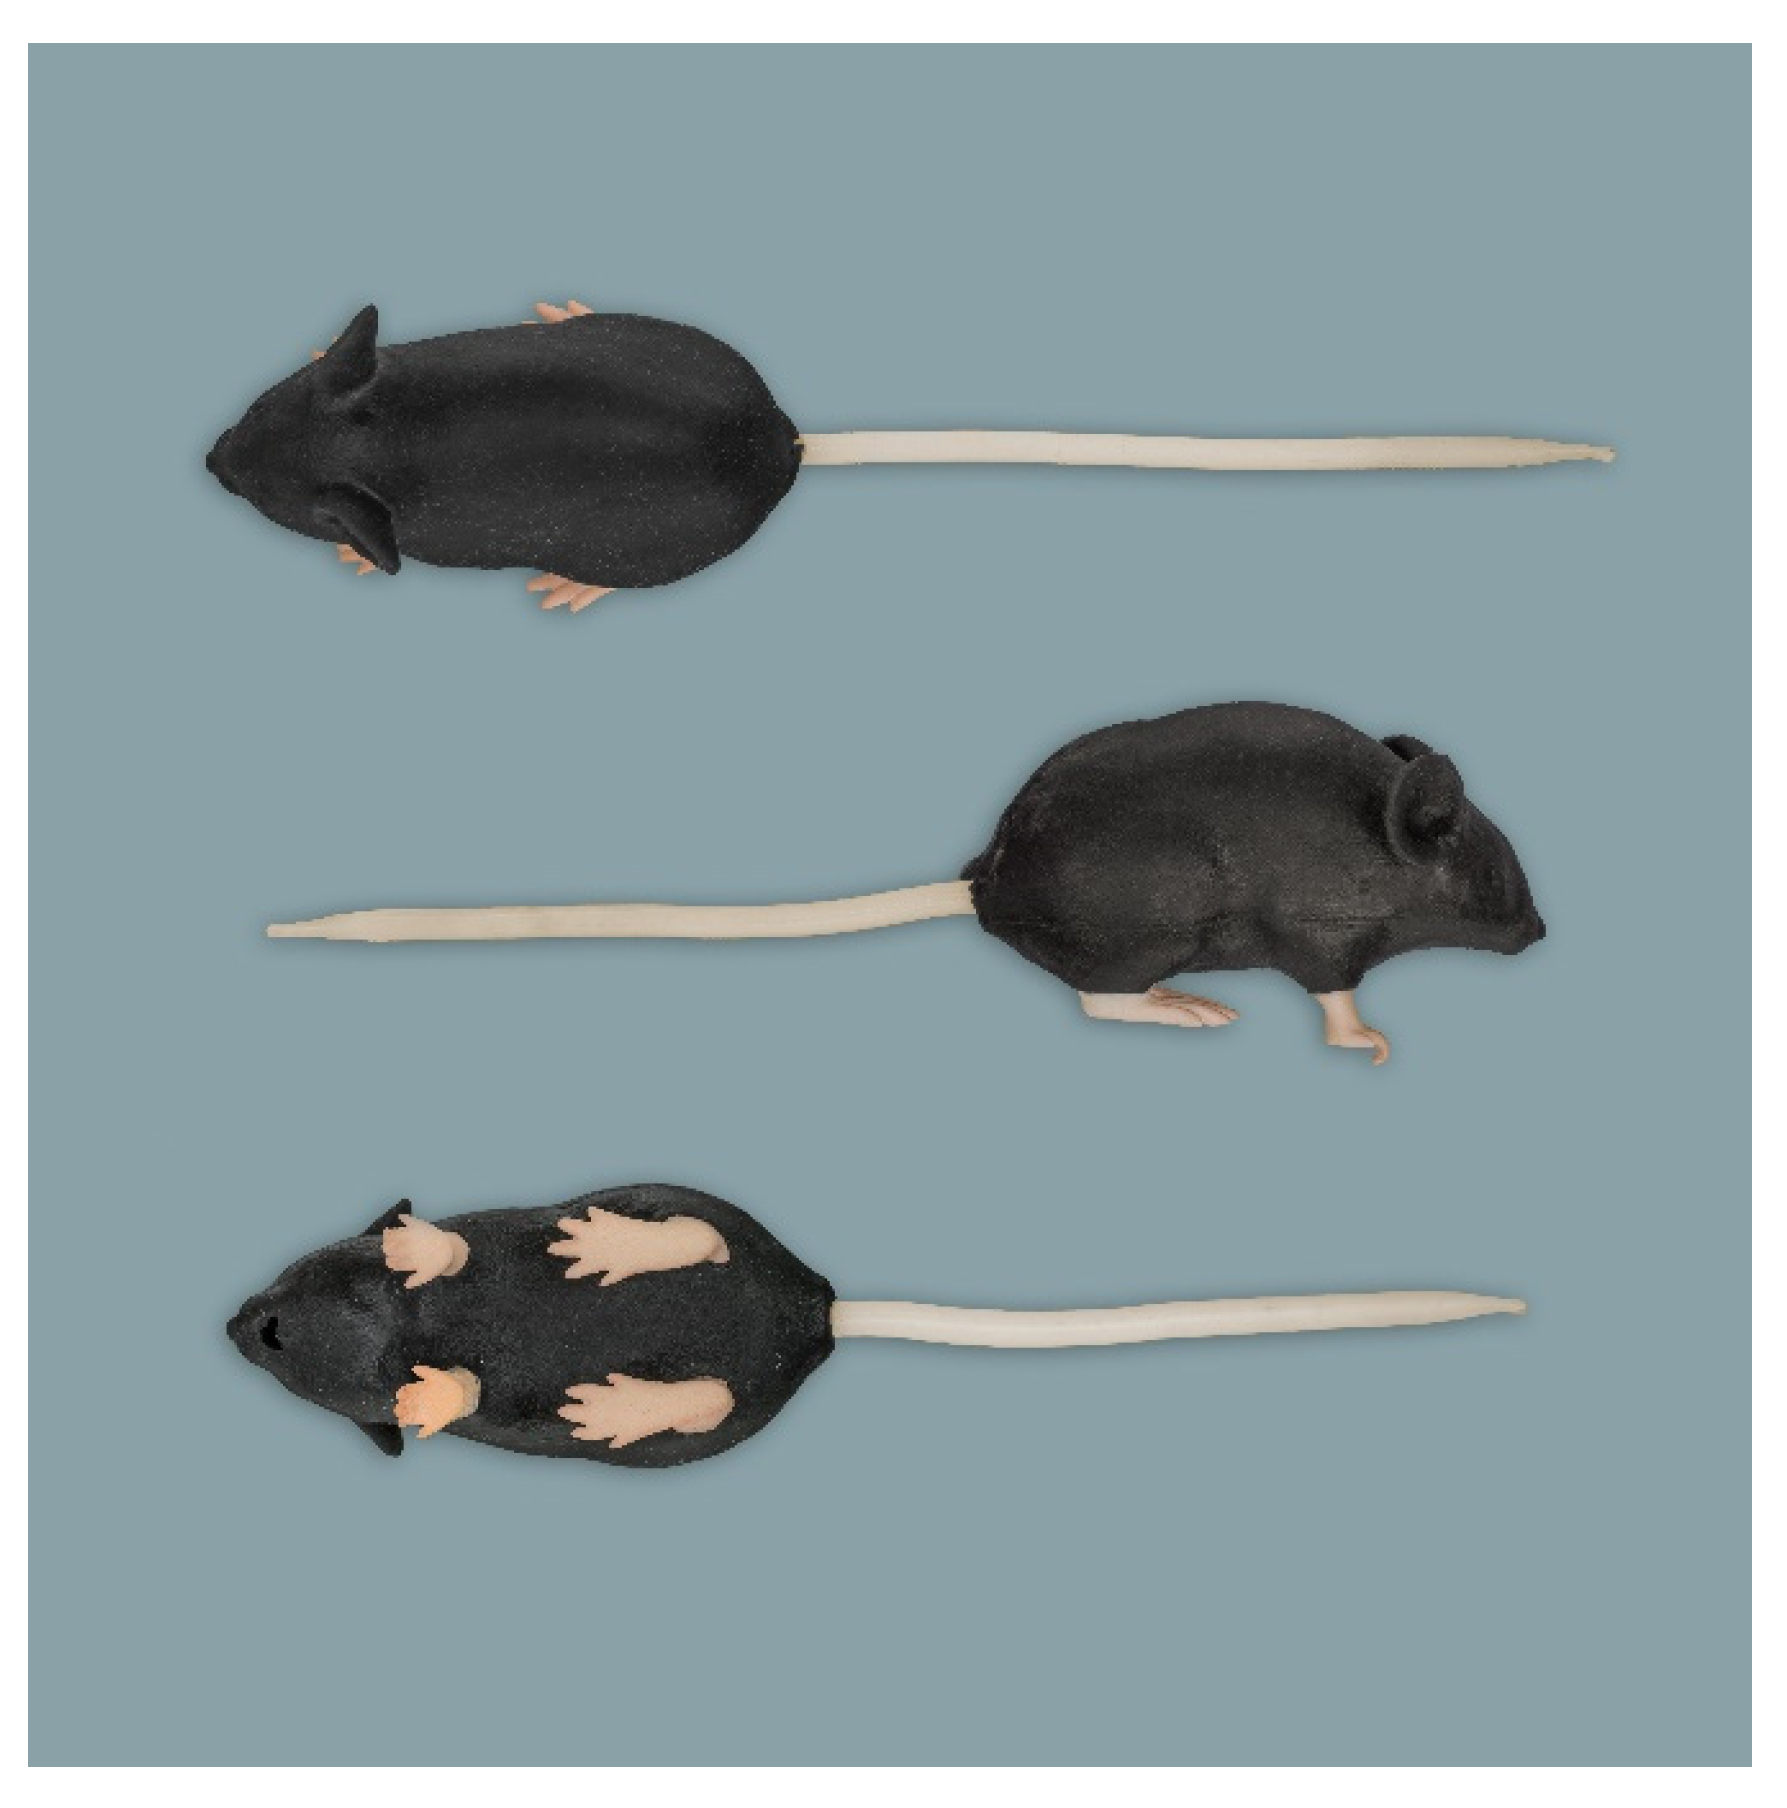 Animals | Free Full-Text | Anatomical Evaluation of Rat and Mouse  Simulators for Laboratory Animal Science Courses